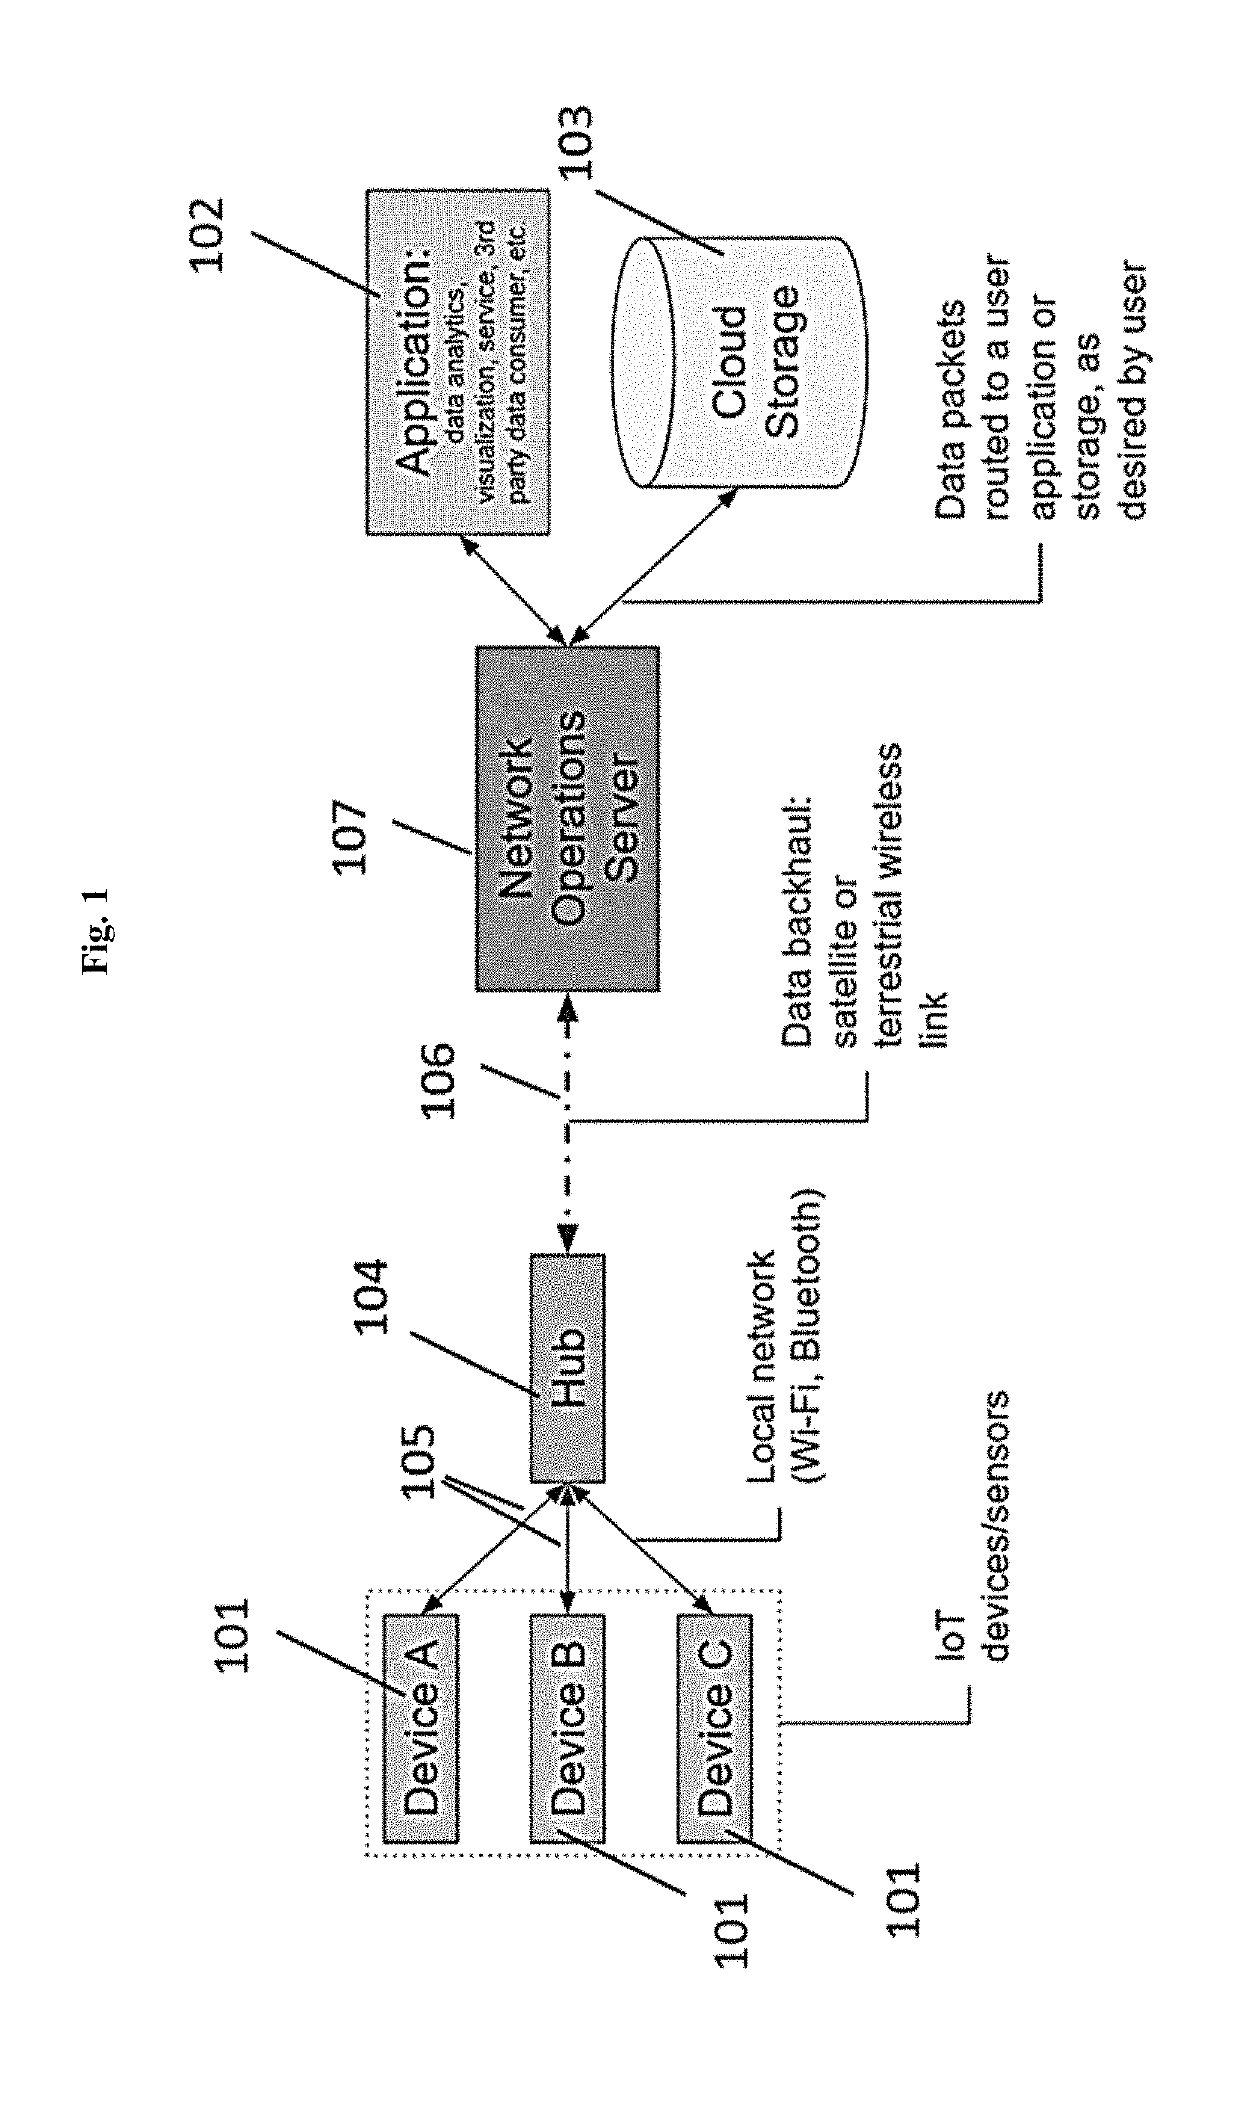 Dynamic multiple access for distributed device communication networks with scheduled and unscheduled transmissions